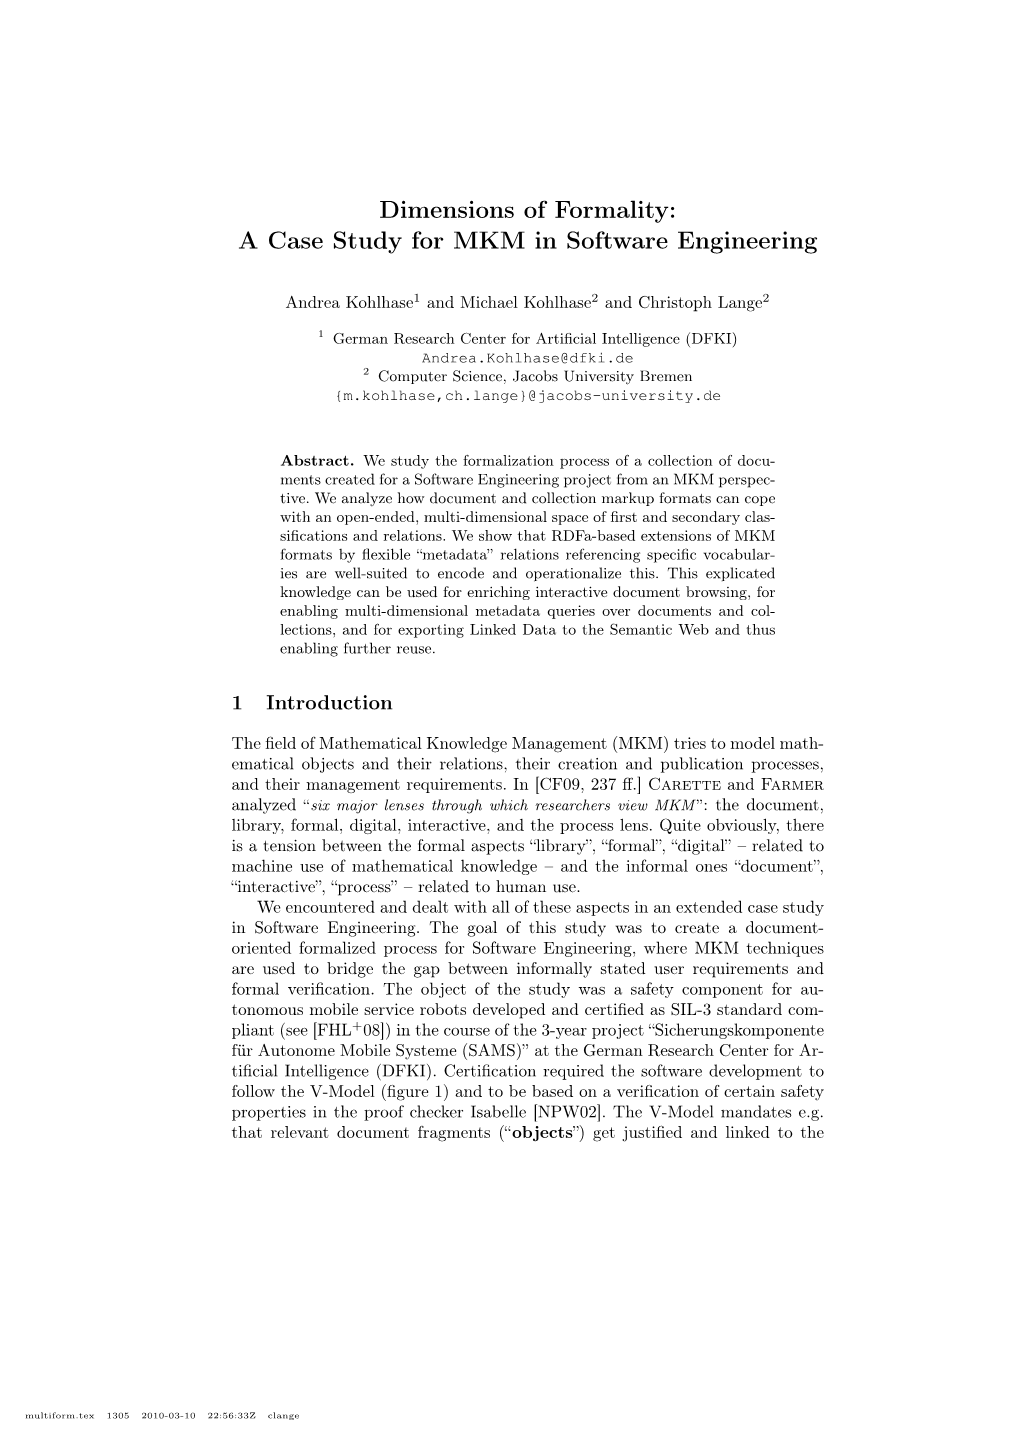 A Case Study for MKM in Software Engineering